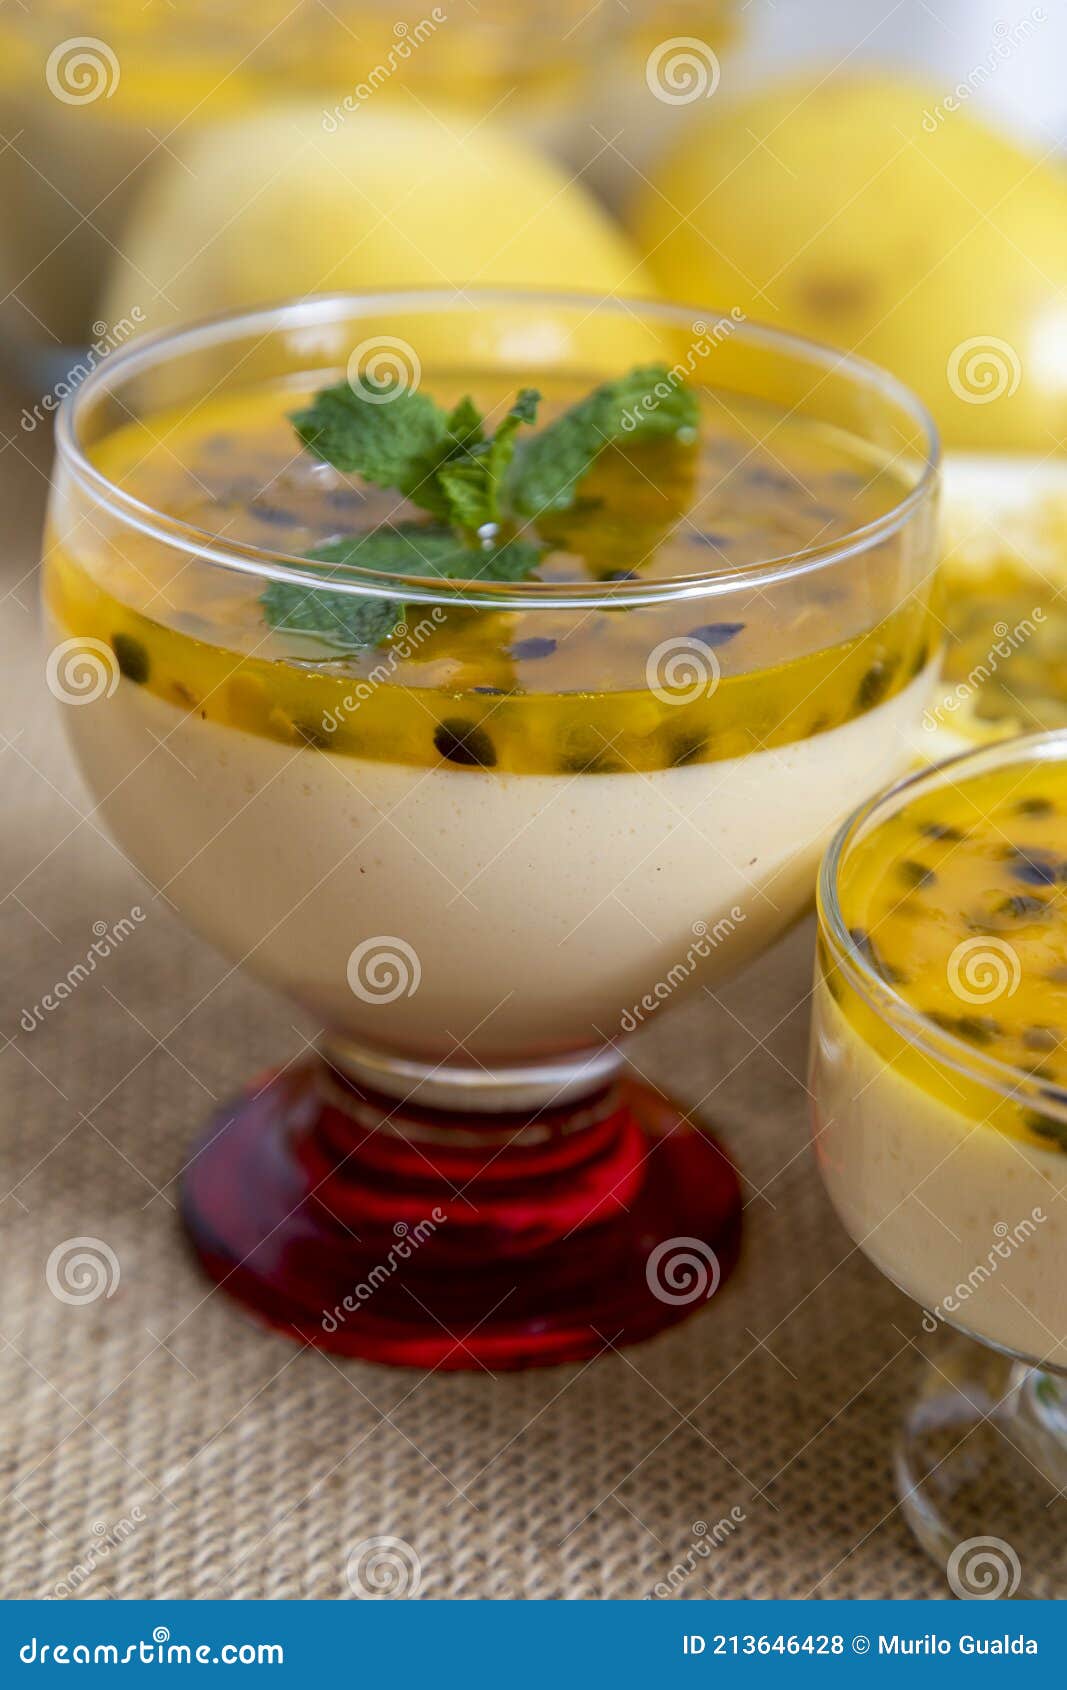 passion fruit mousse served in bowl